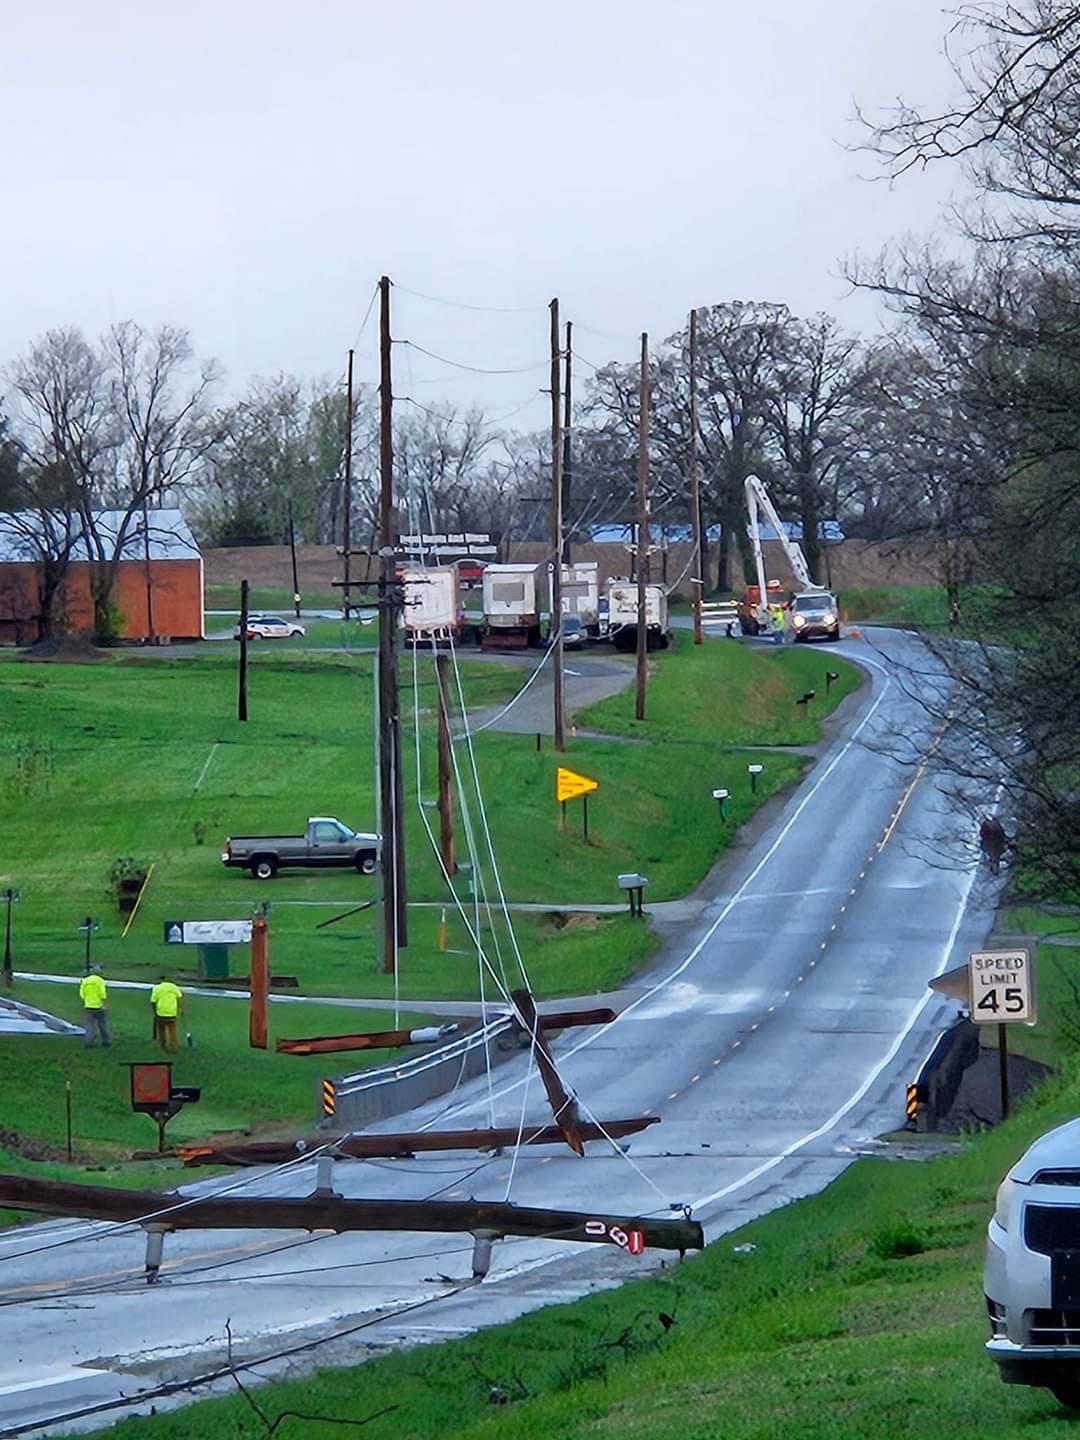 Downed power poles near Chester Illinois